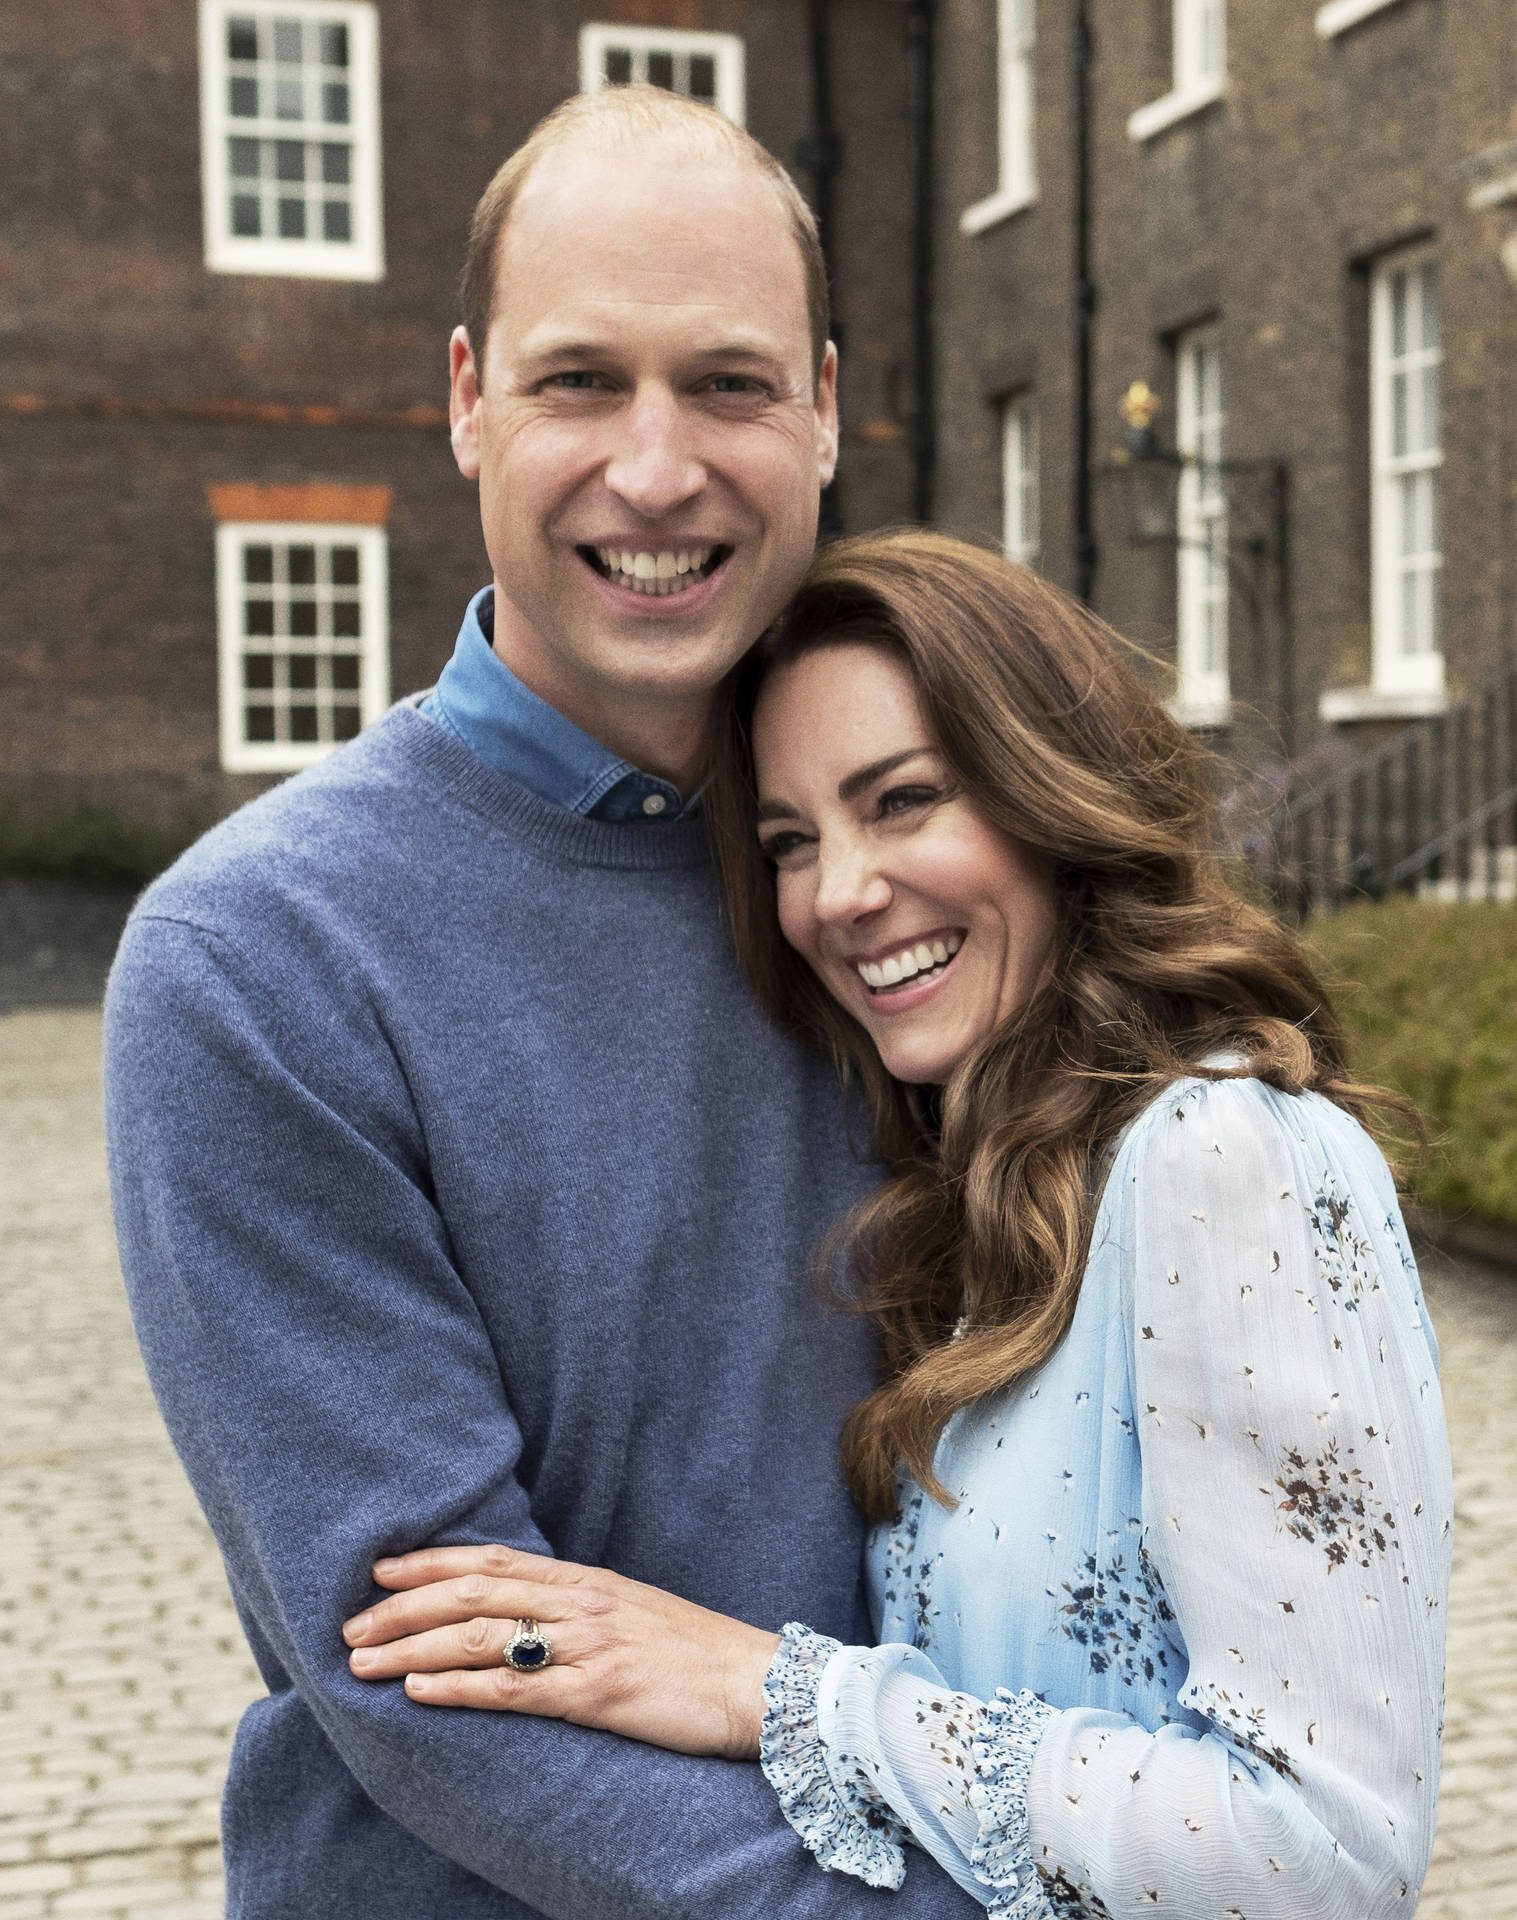 Prince William And Kate Embracing Wallpaper